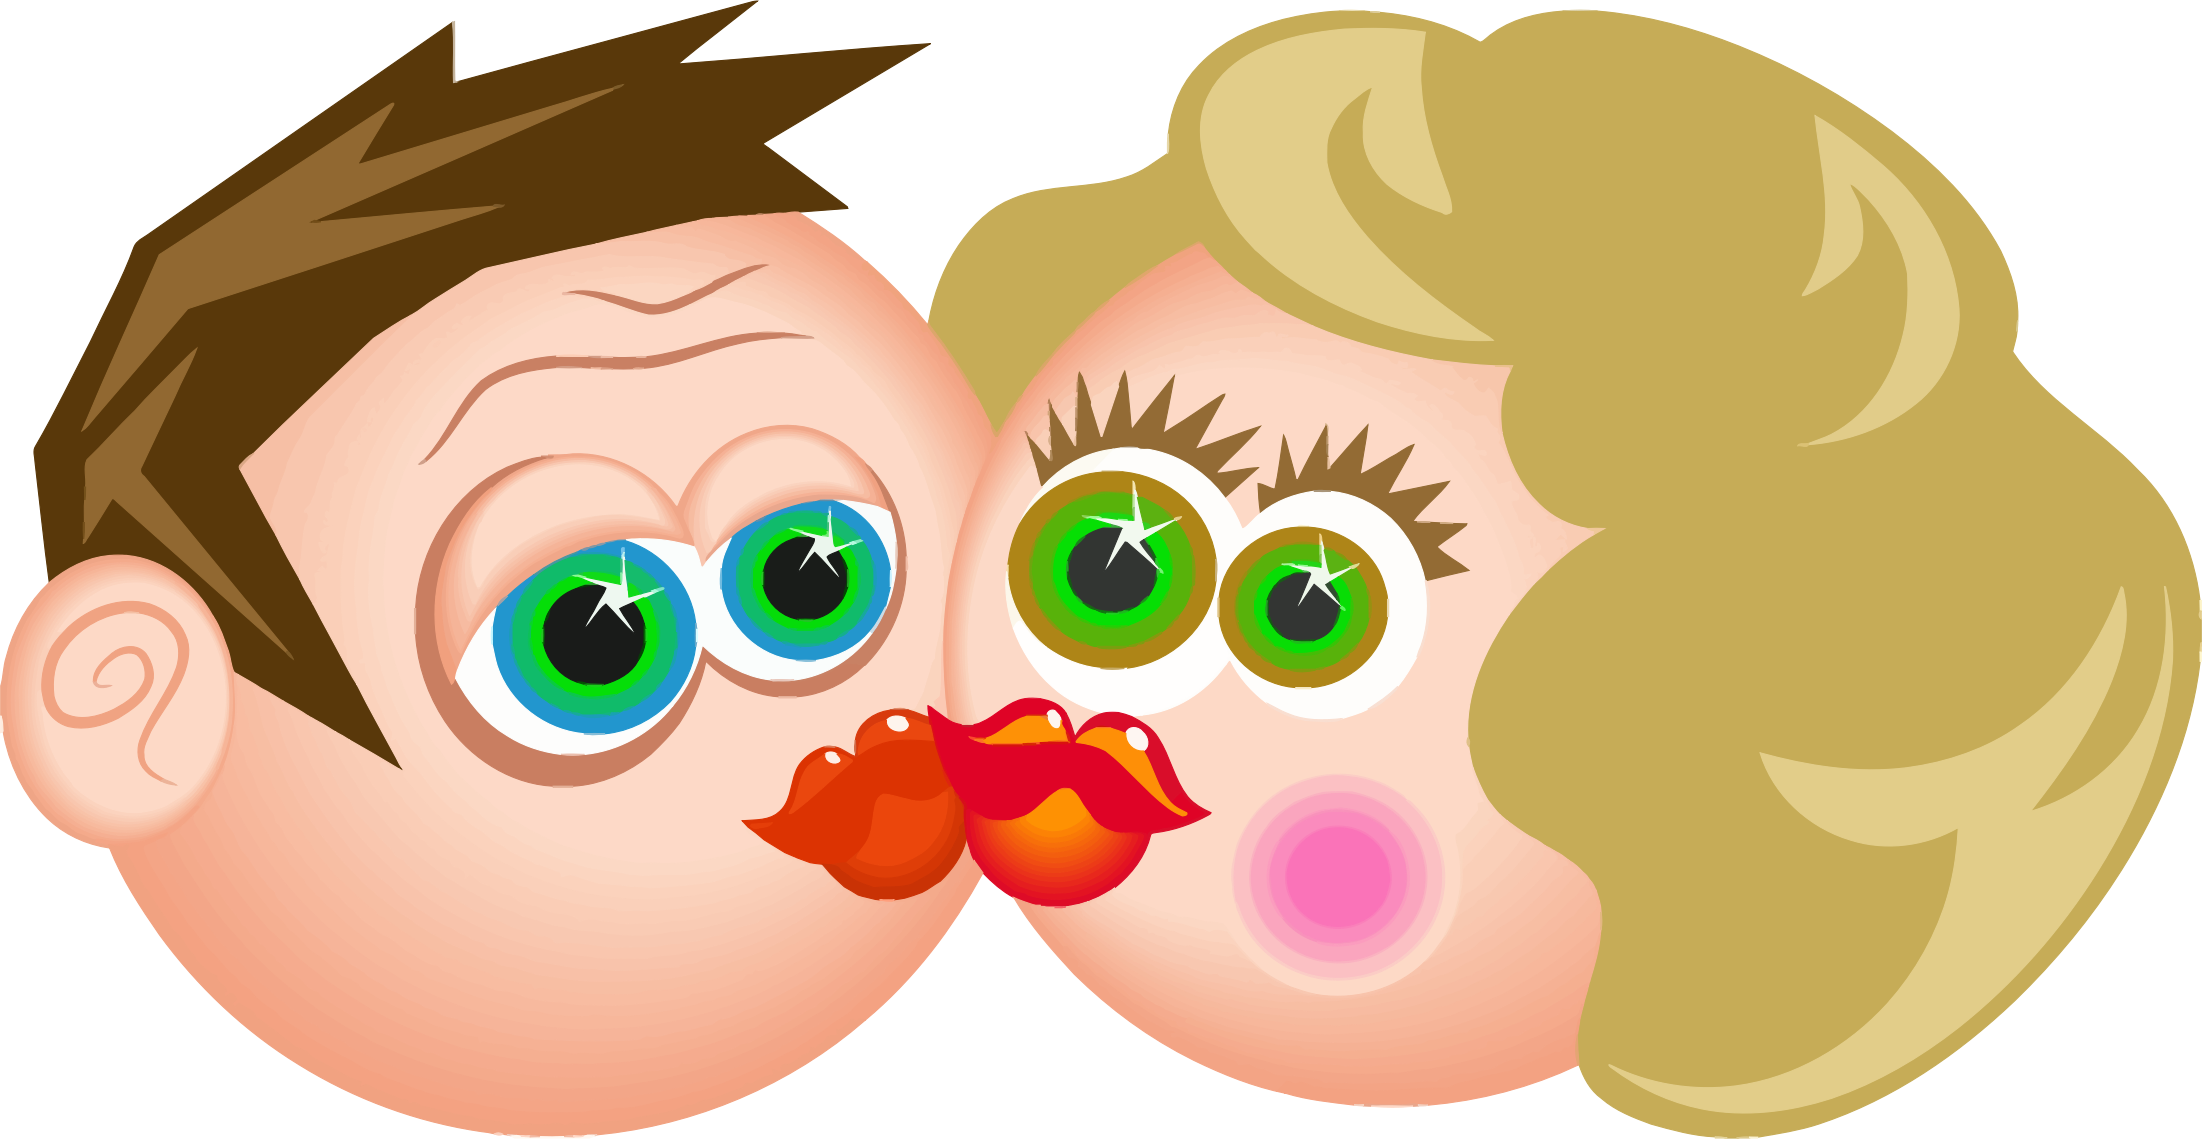 Icon free on dumielauxepices. Kiss clipart baby kiss